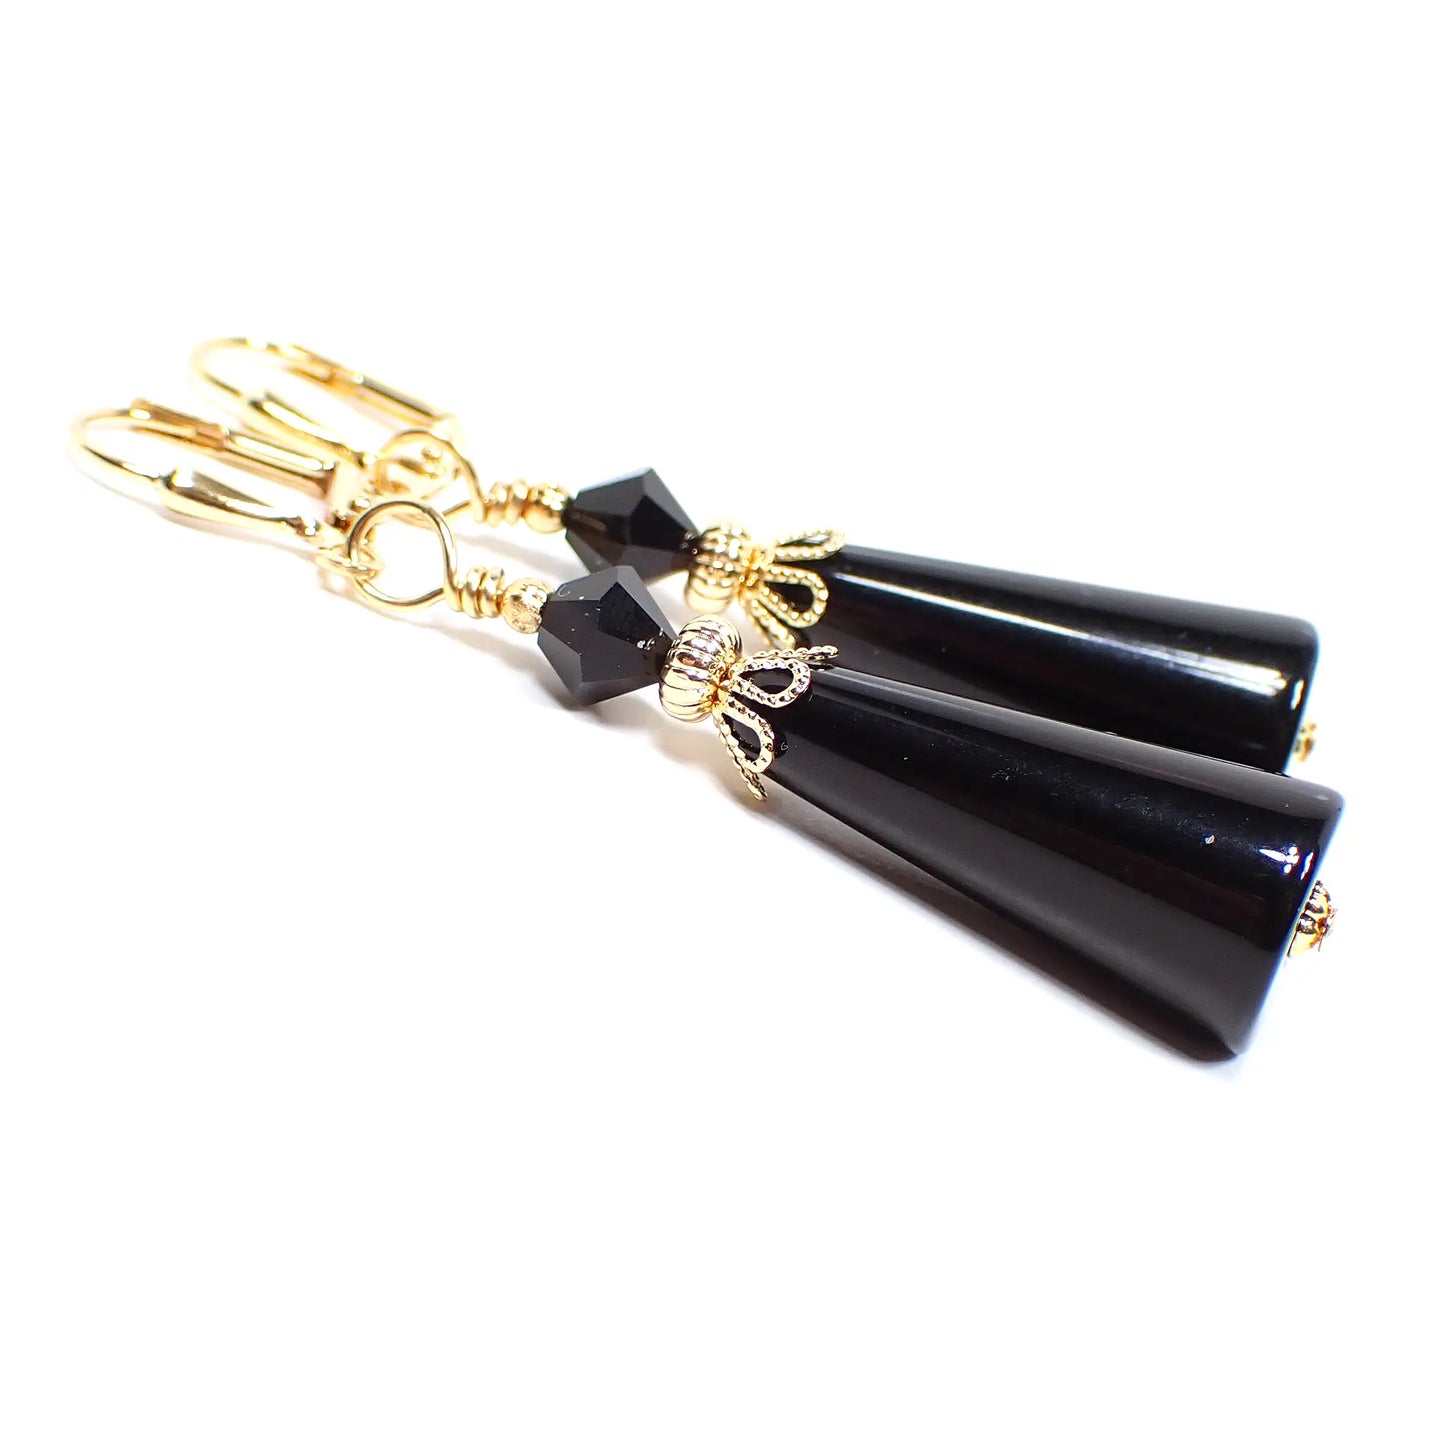 Black Lucite Handmade Cone Earrings Gold Plated Hook Lever Back or Clip On